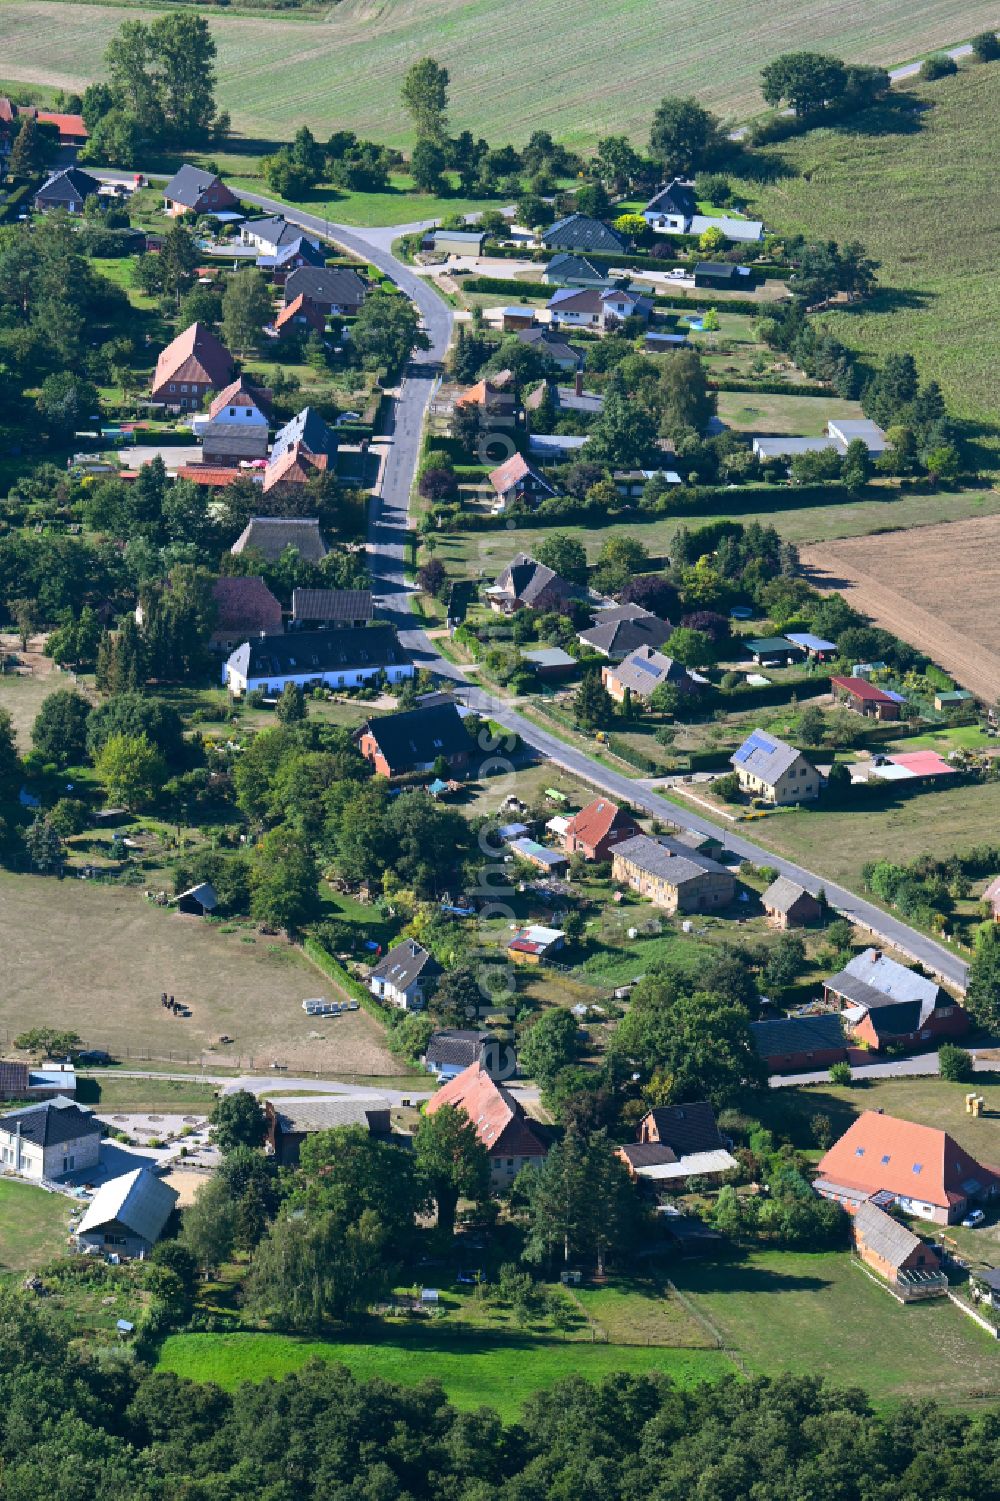 Radelübbe from above - Village - View along the ring road in Radeluebbe in the state Mecklenburg - Western Pomerania, Germany